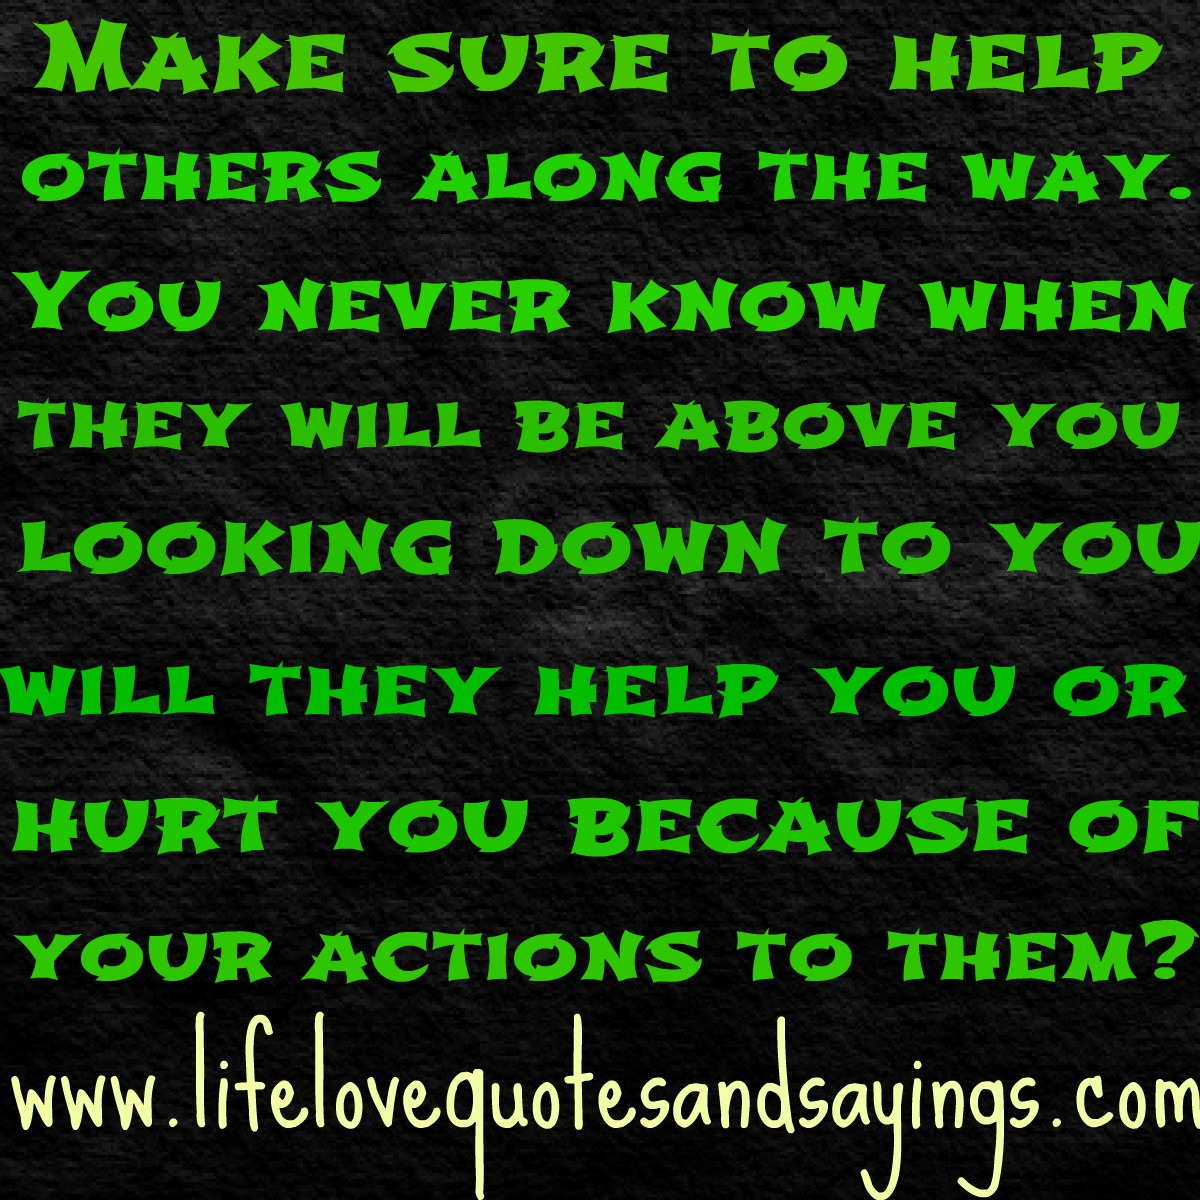 Helping Others Quotes And Sayings. QuotesGram